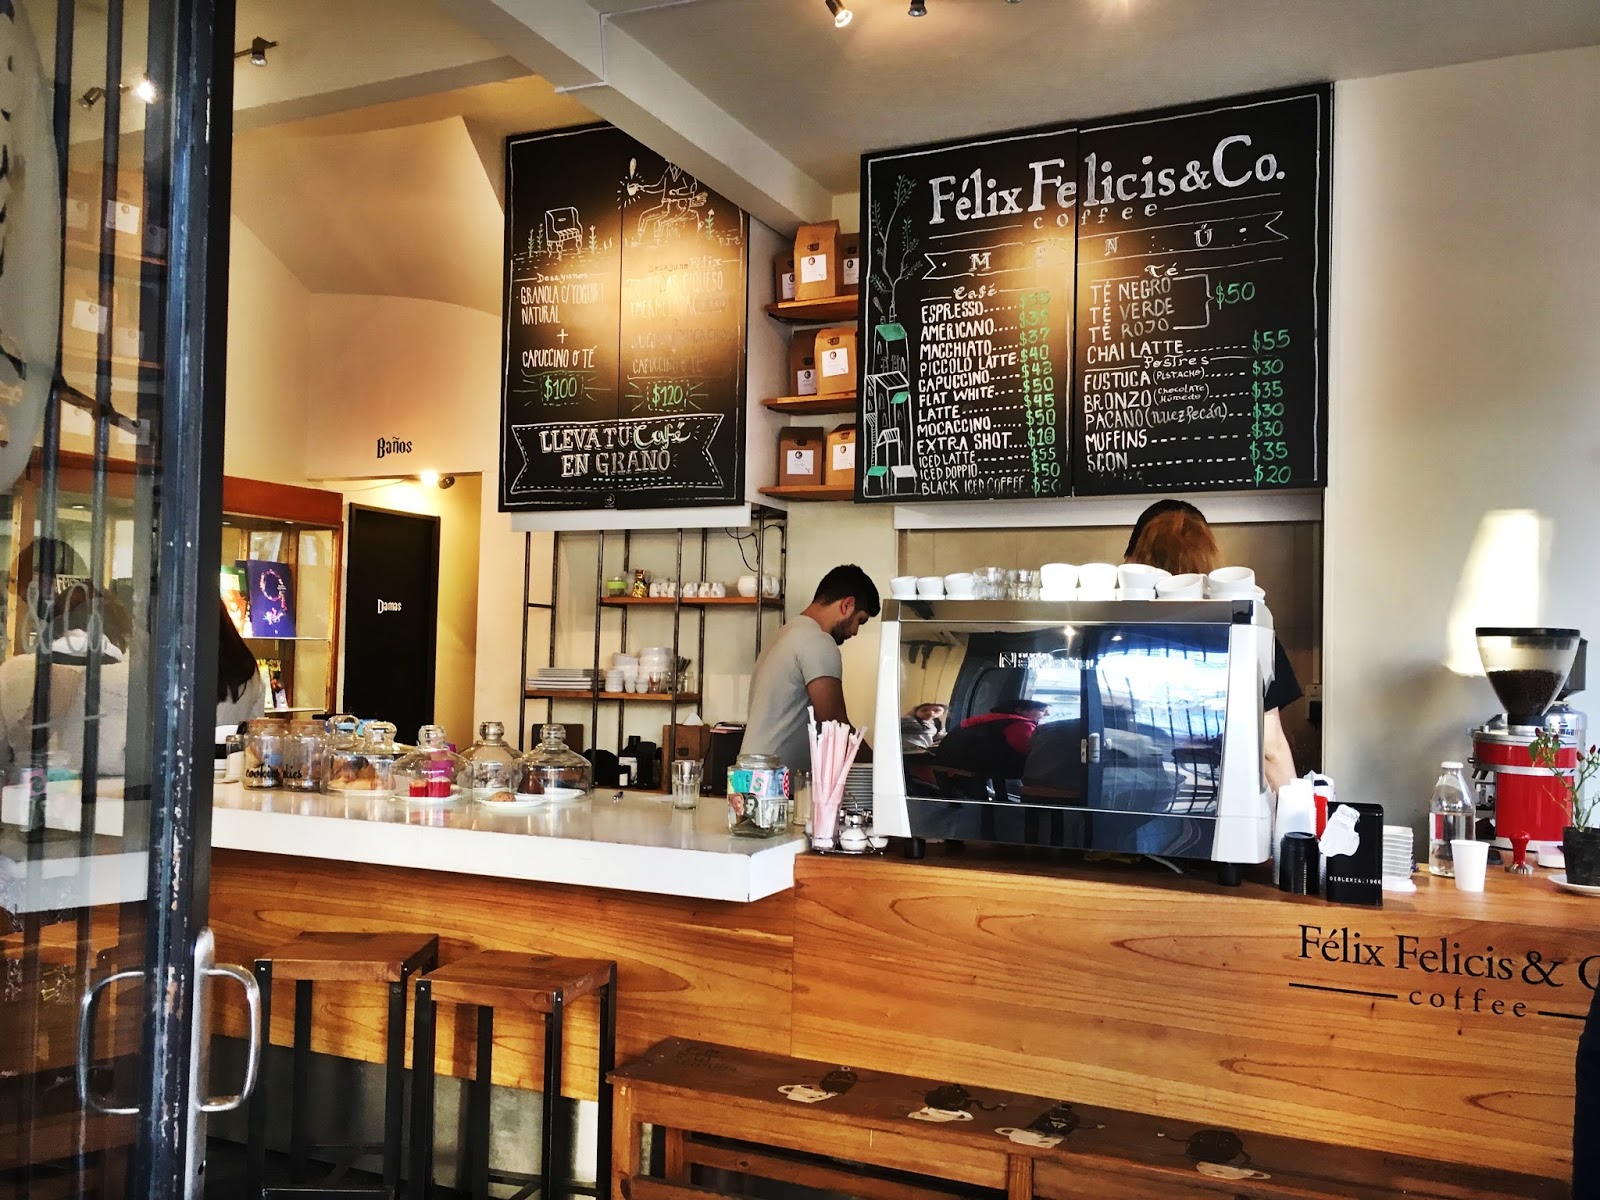 Felix Felicis and Co coffe place at buenos aires.